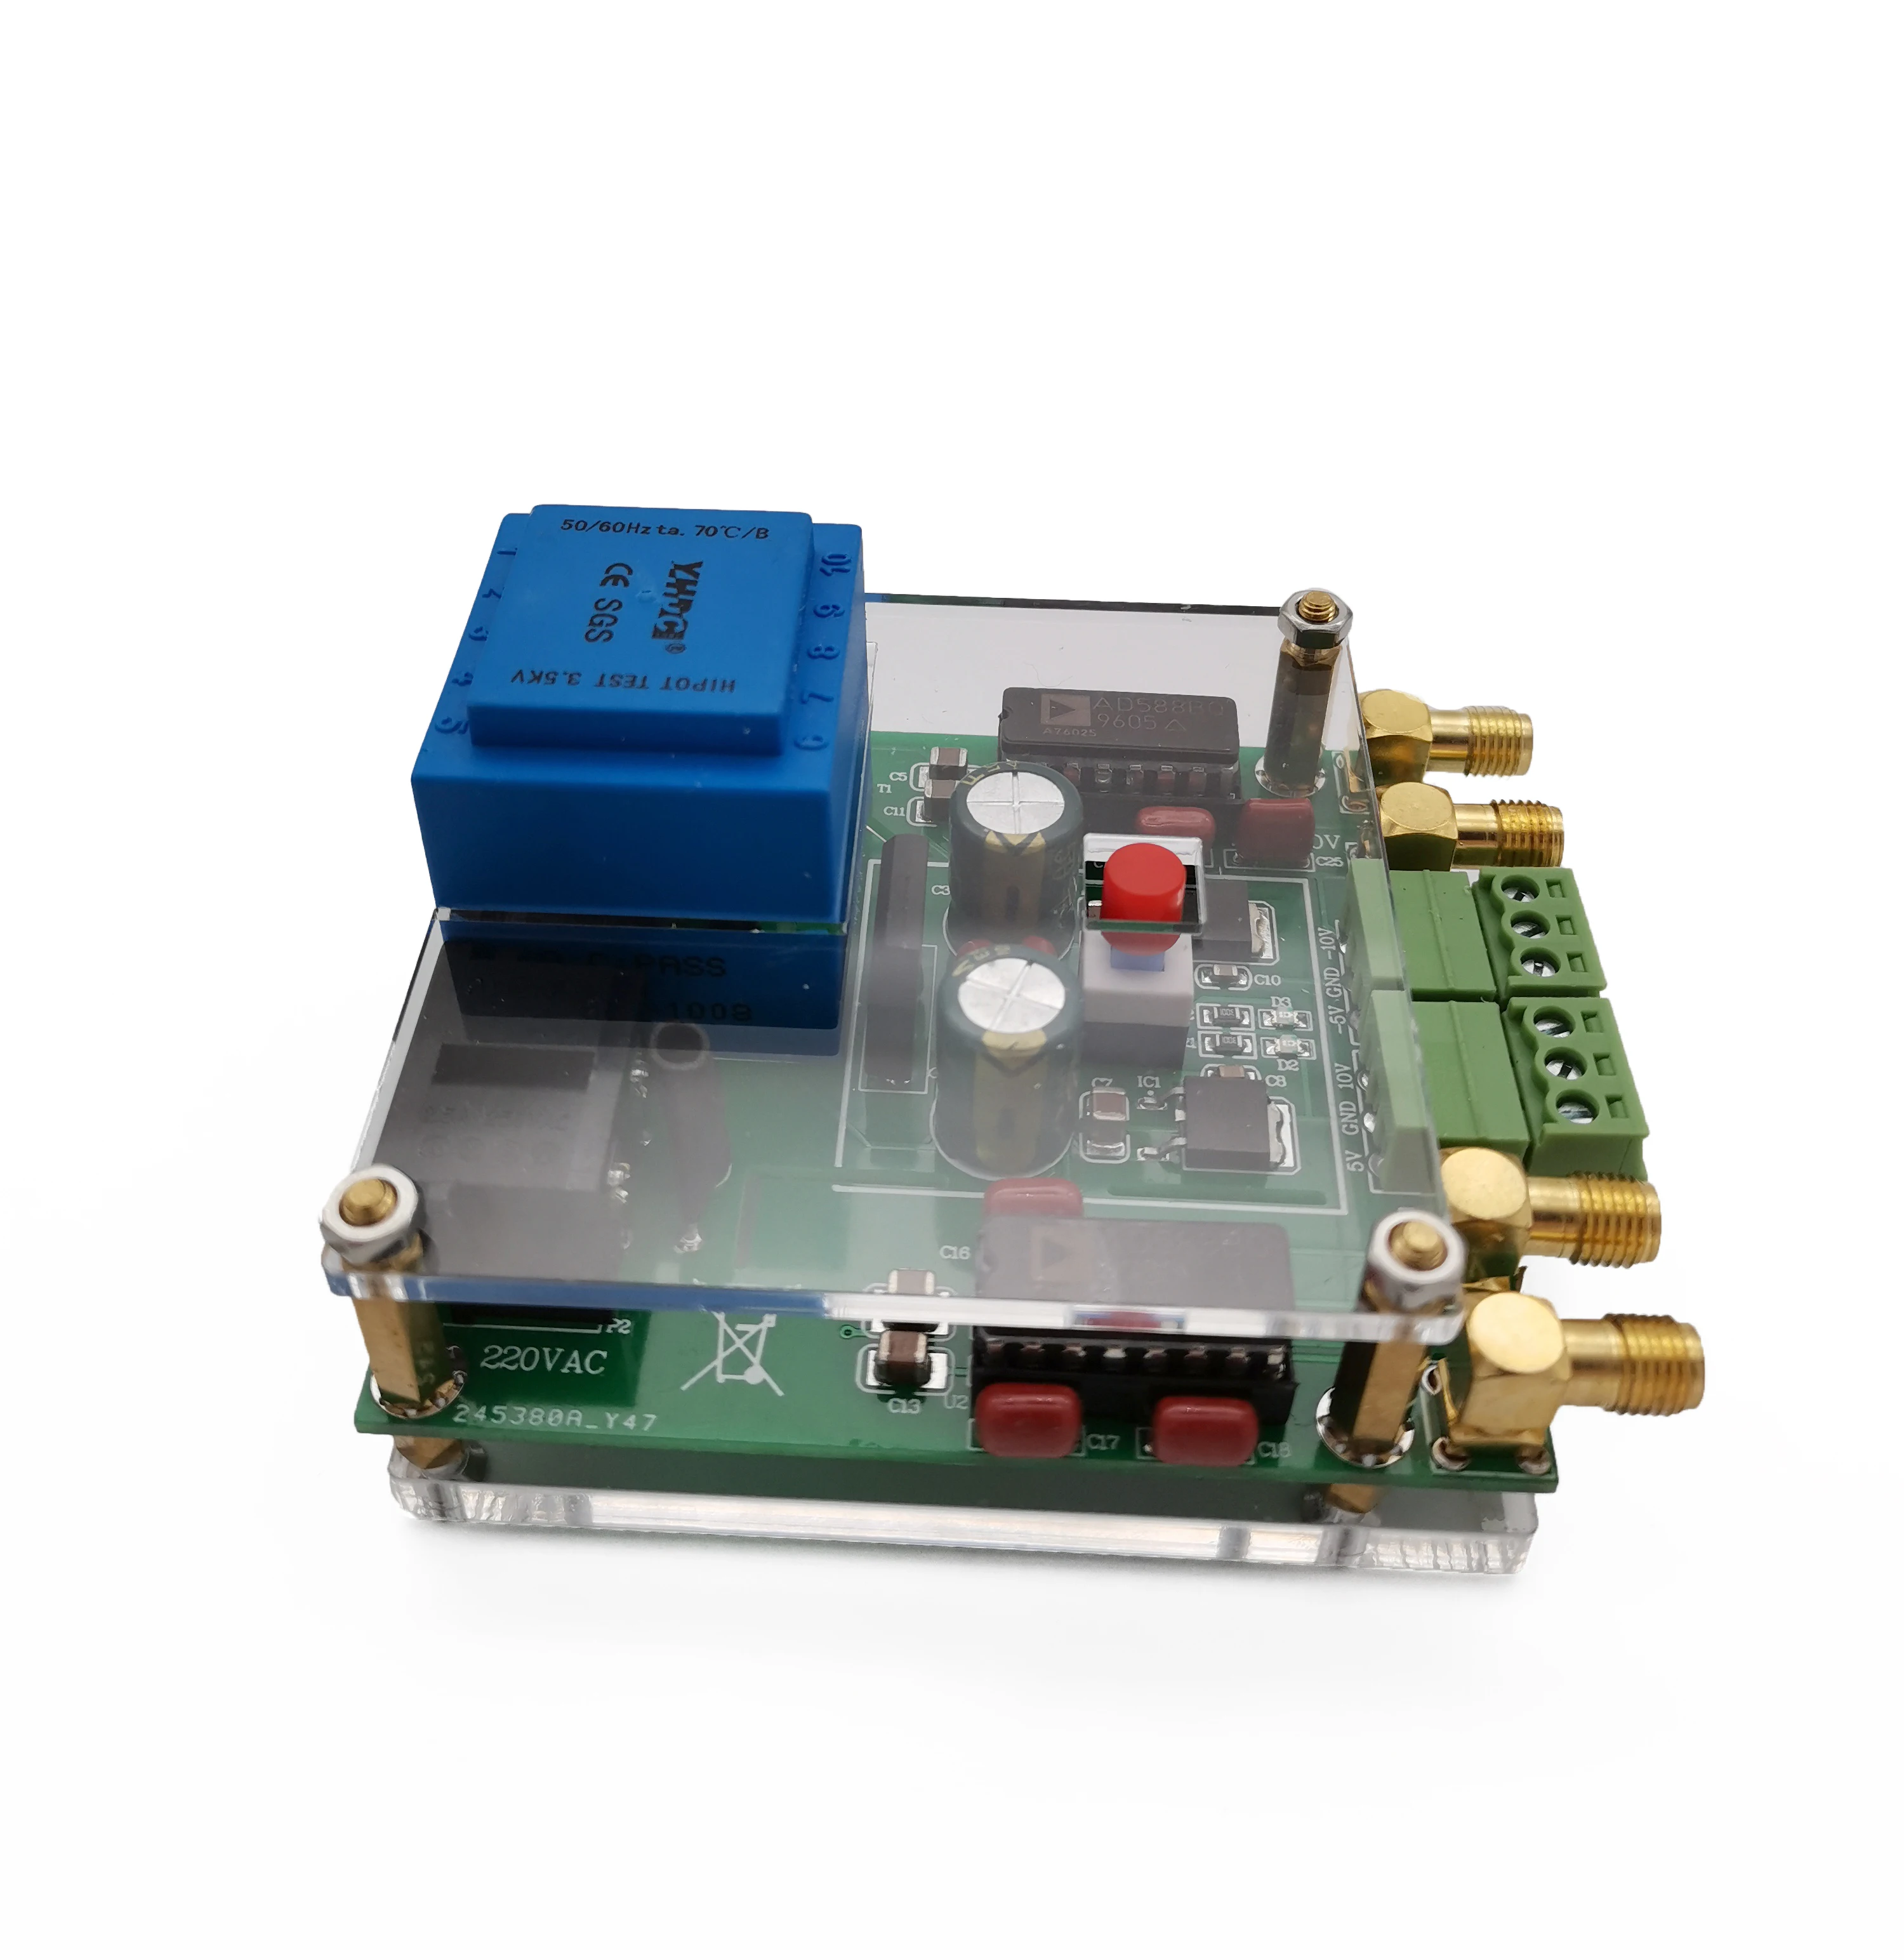 AD588 voltage reference positive and negative 5V 10V DAC voltage reference source meter correction high precision